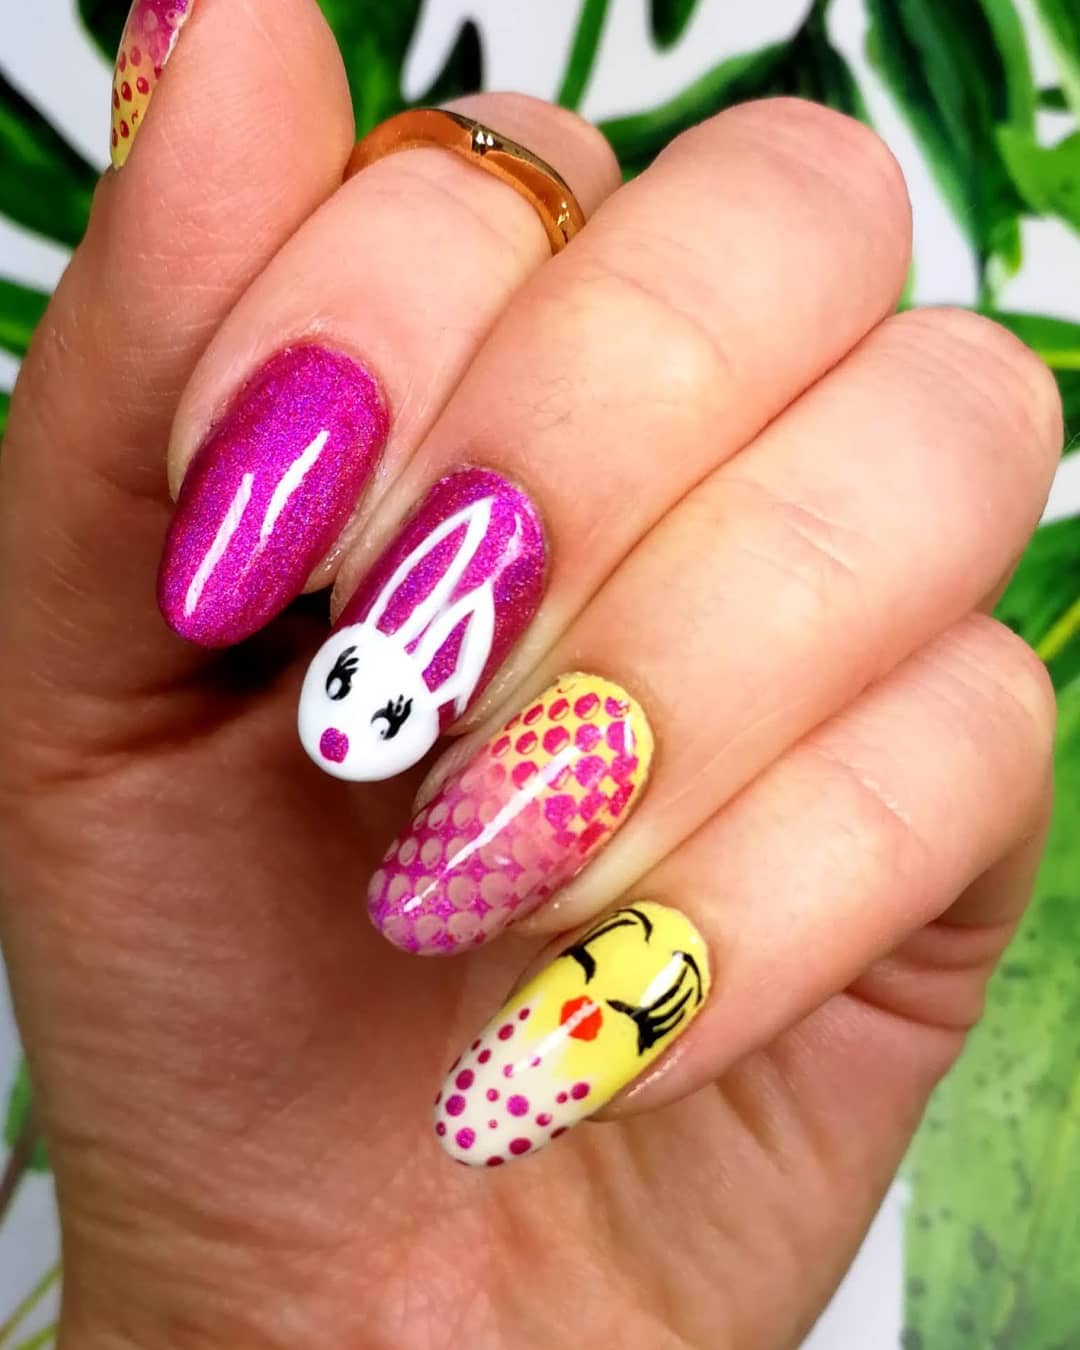 Shinning Pink Nails with Chick and Bunny Design